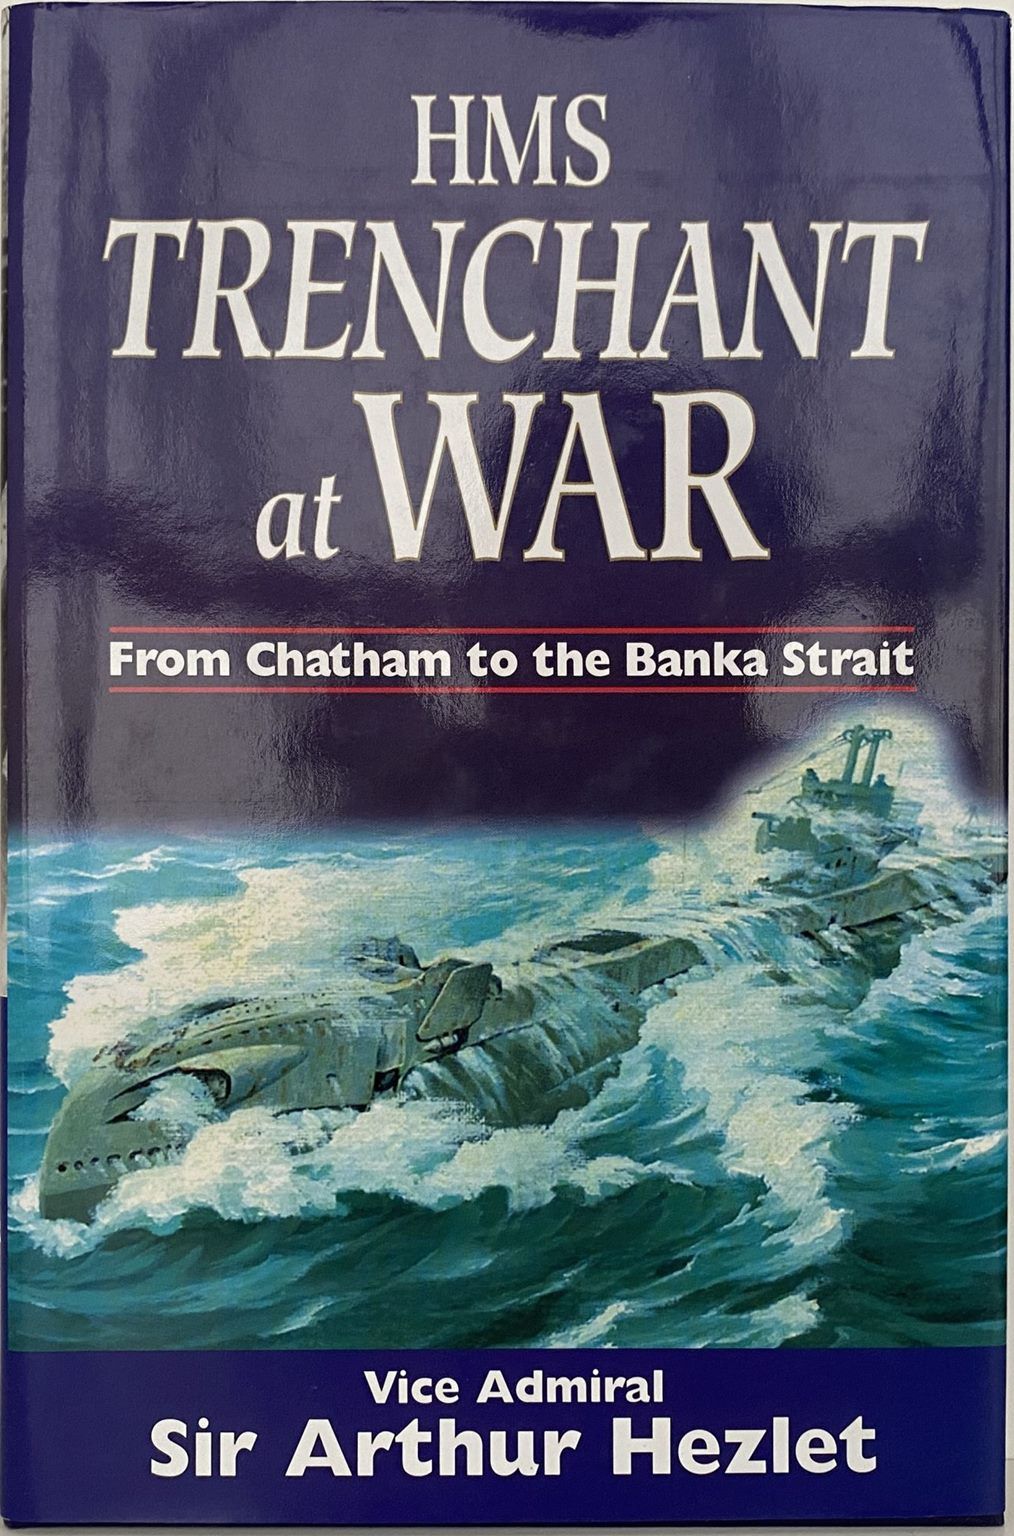 HMS TRENCHANT at WAR: From Chatham to the Banka Strait